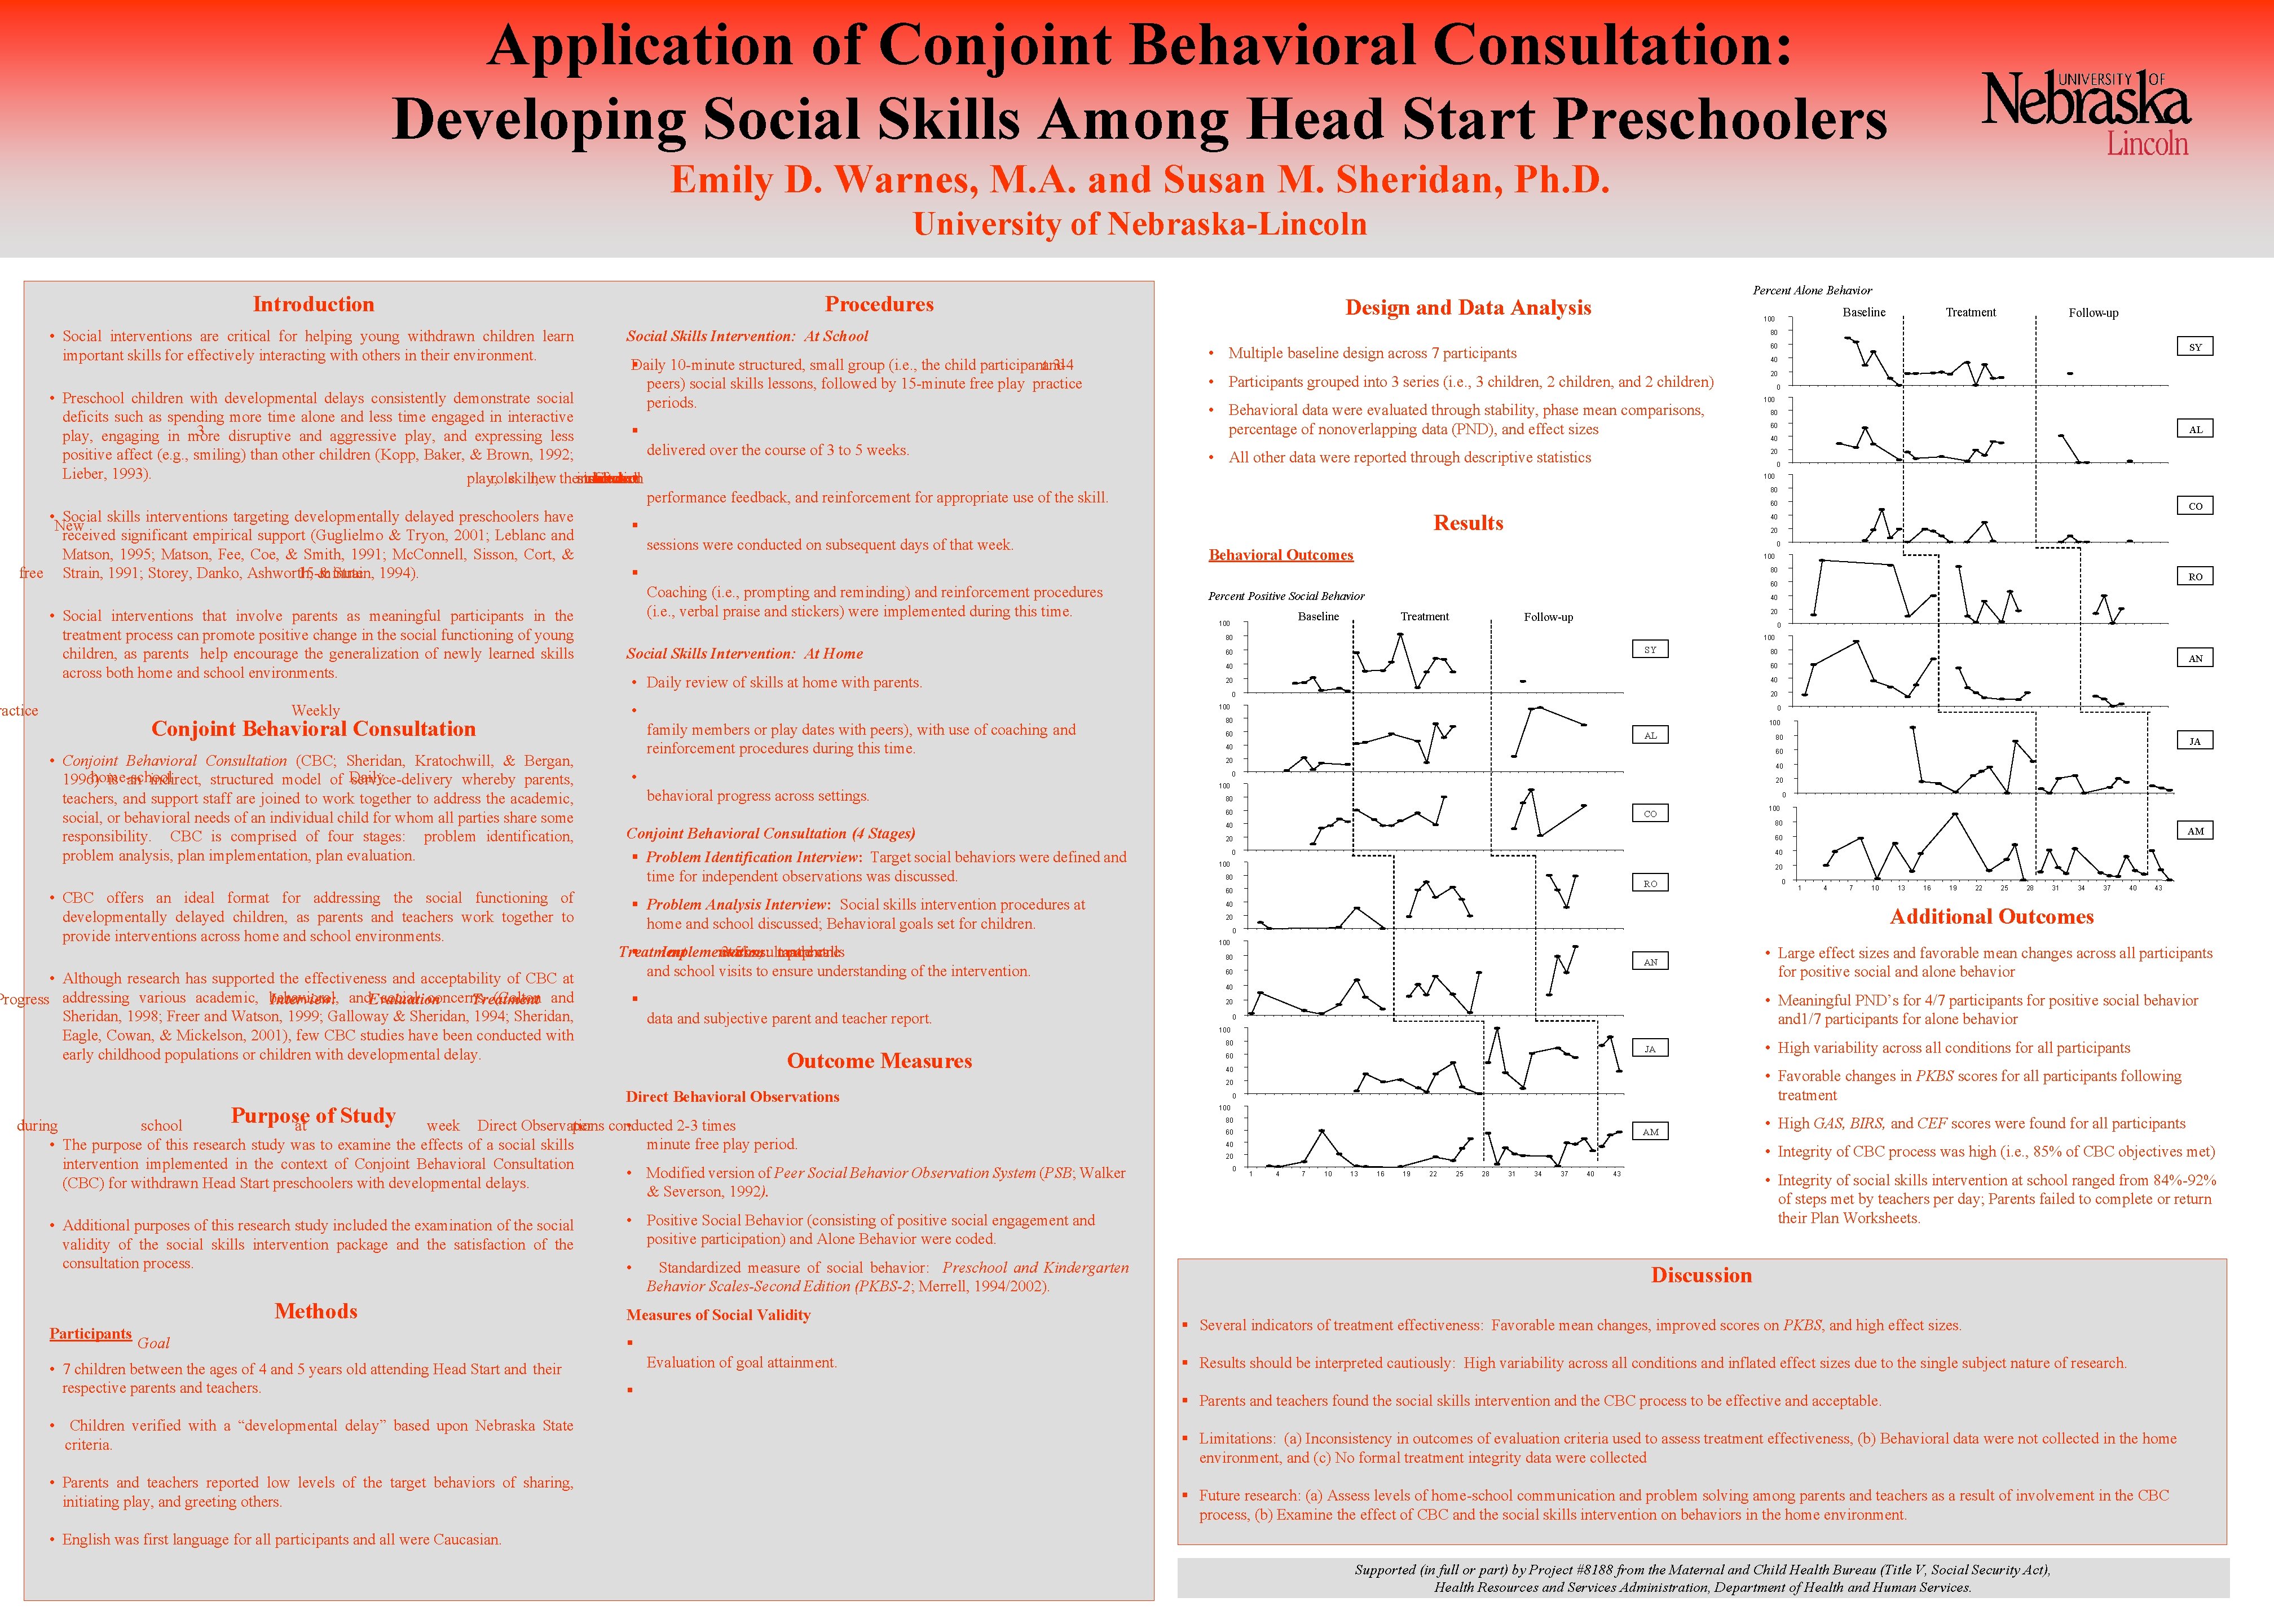 Application of Conjoint Behavioral Consultation: Developing Social Skills Among Head Start Preschoolers Emily D.